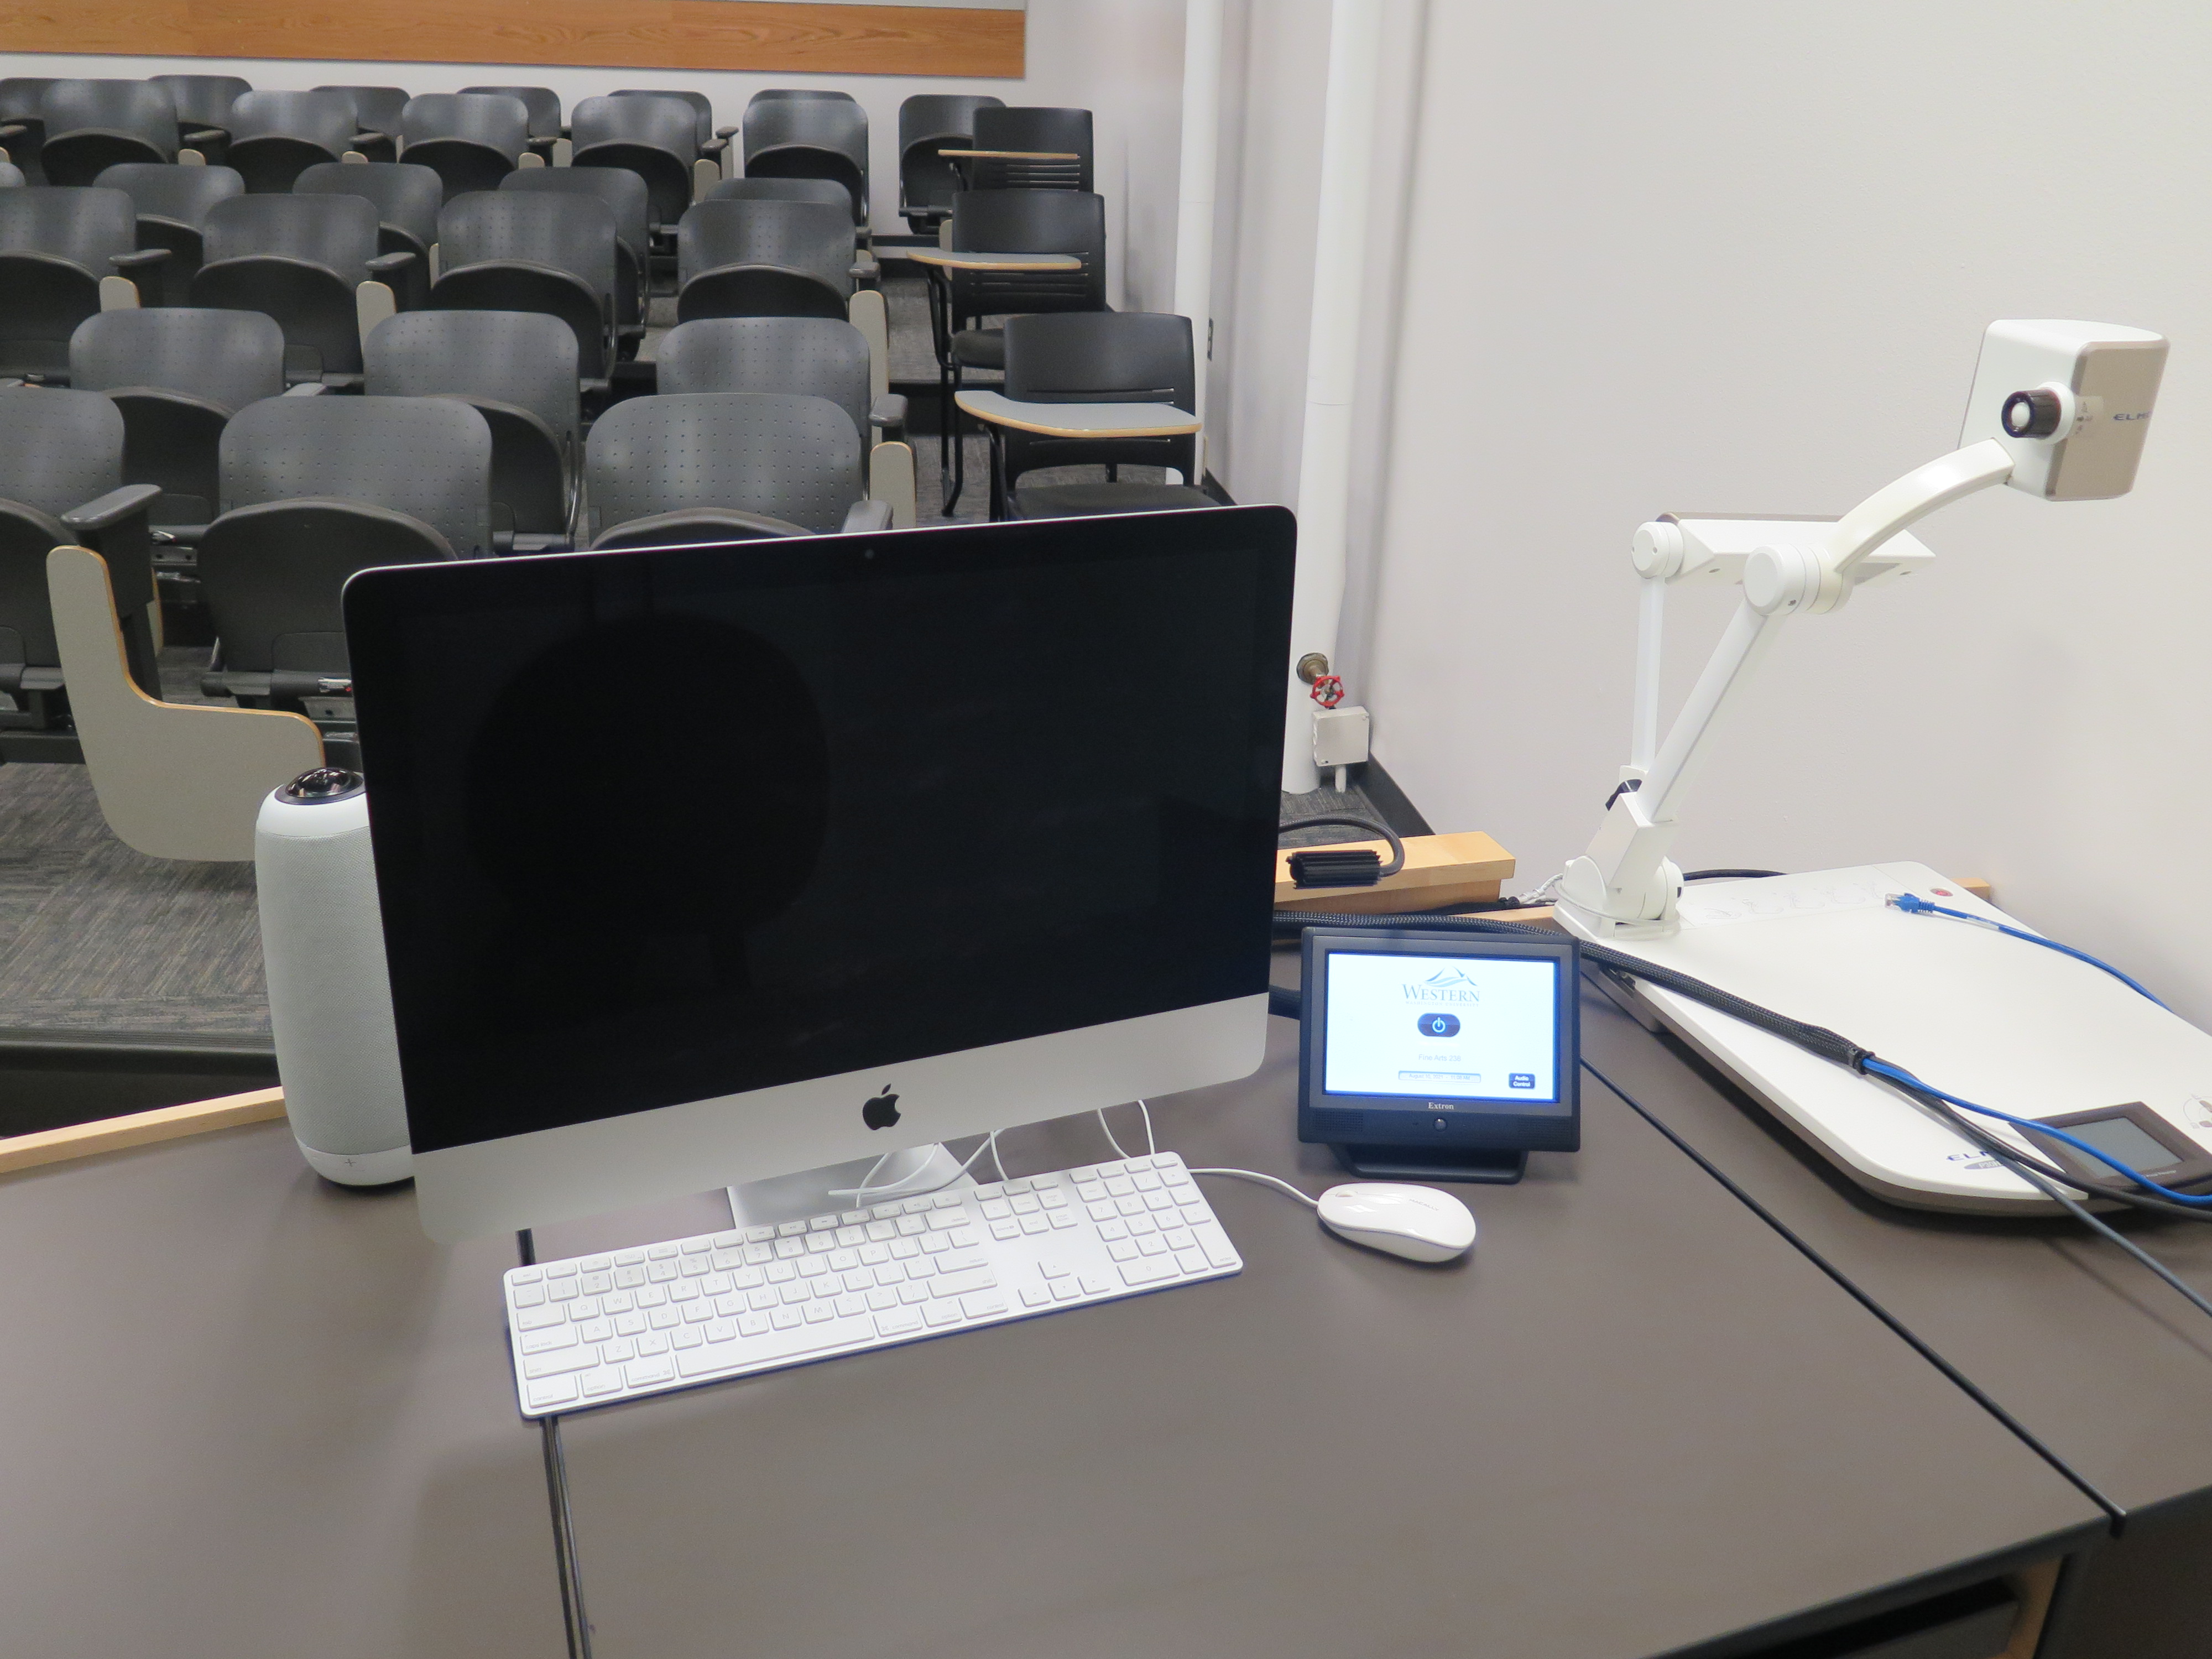 On top of Podium is Owl Webcam, Apple (Mac) Computer Monitor, Touch Screen Controller, and Elmo Document Camera